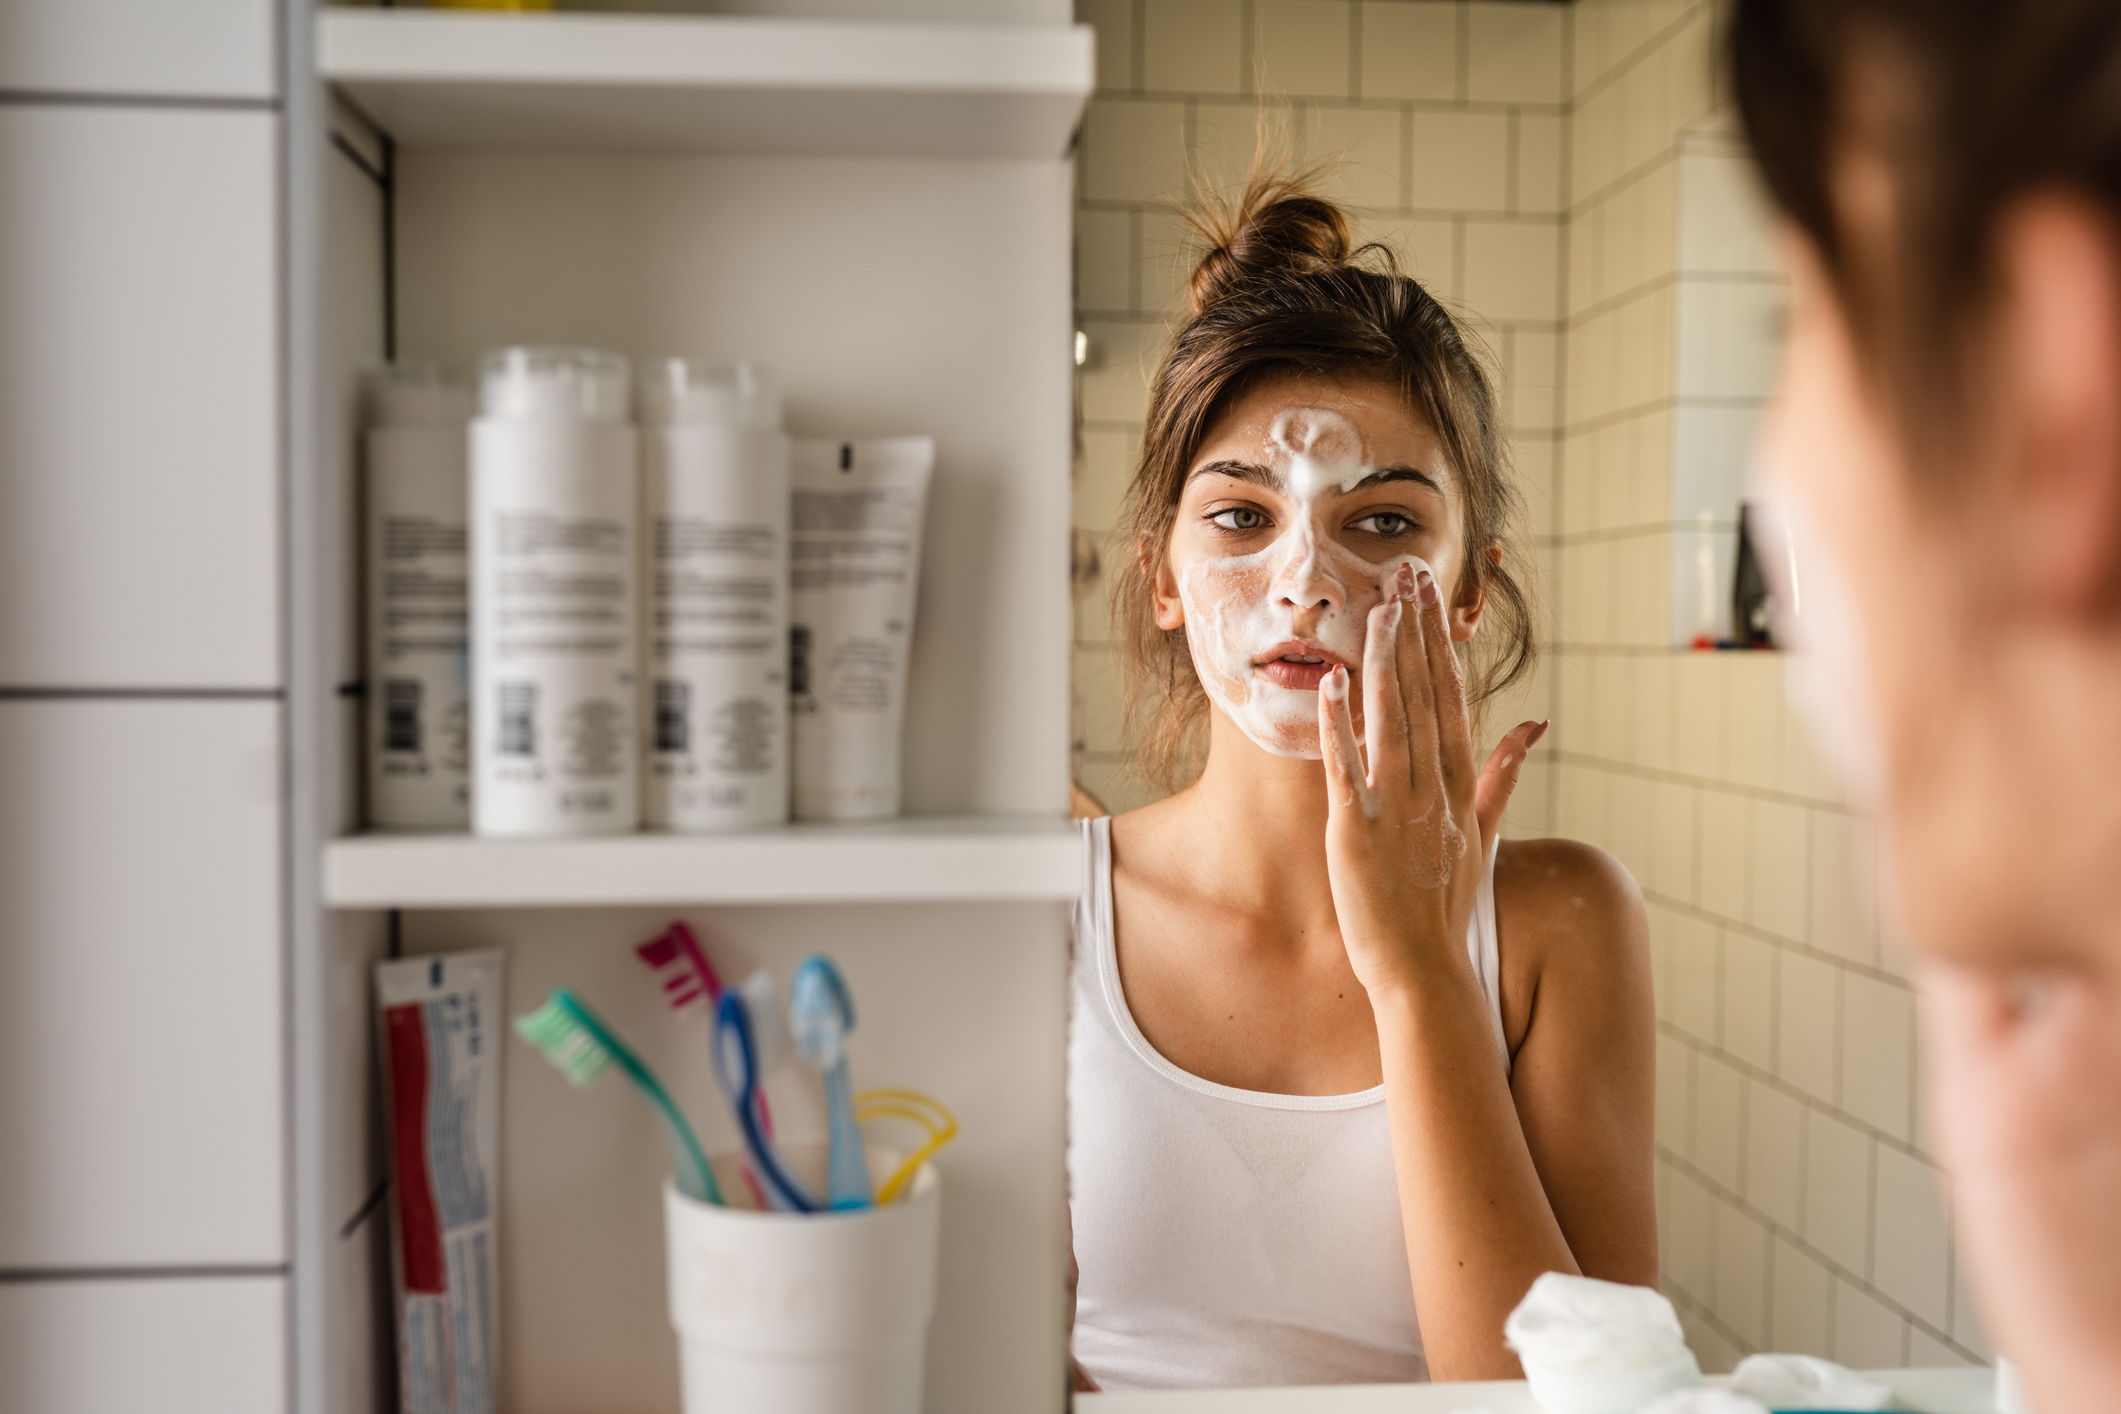 girl in front of mirror applies facial cream, with open cabinet and skincare products in background